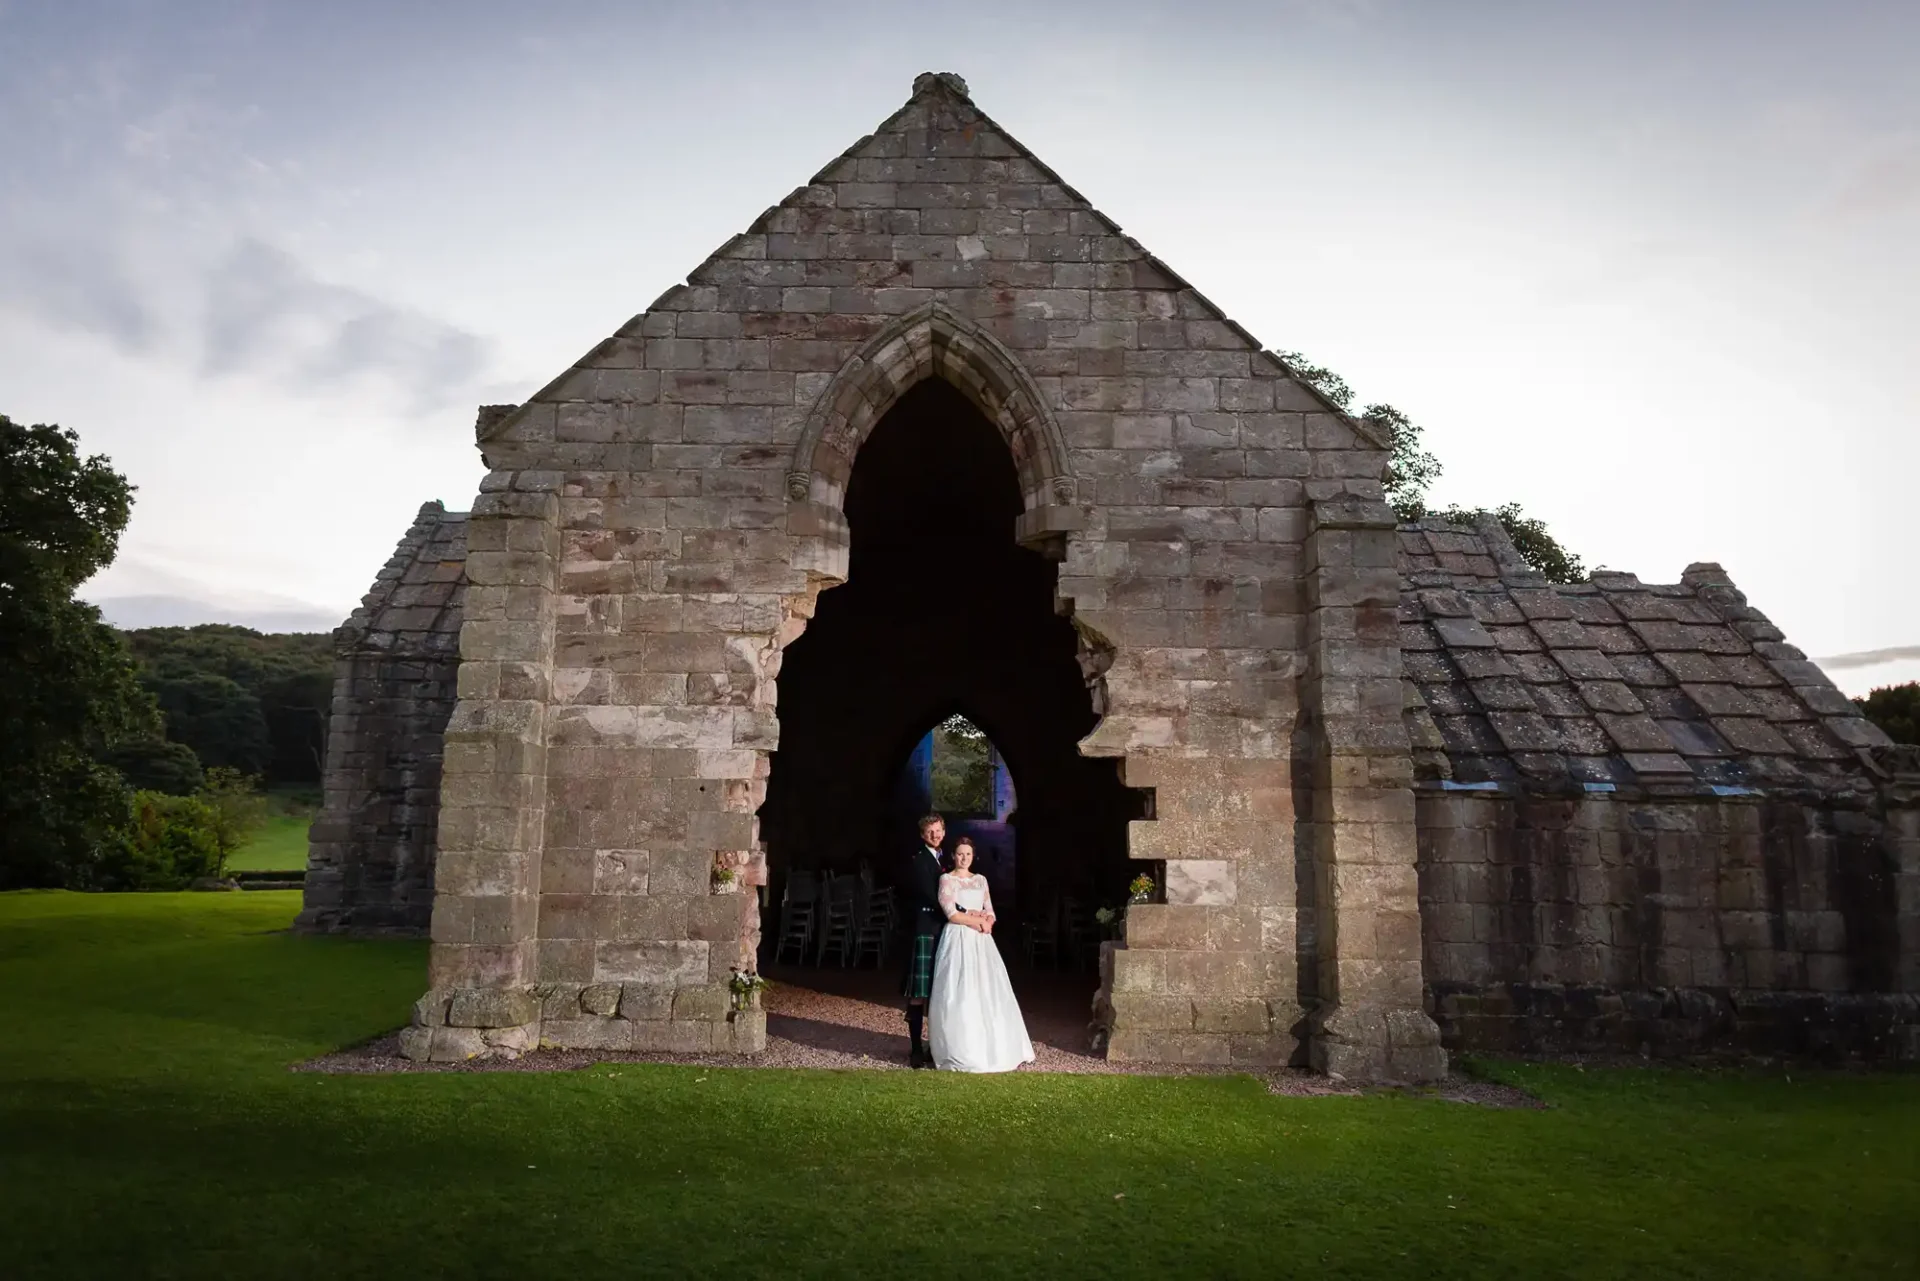 A bride and groom standing in the archway of an old stone chapel with lush greenery in the background at dusk.